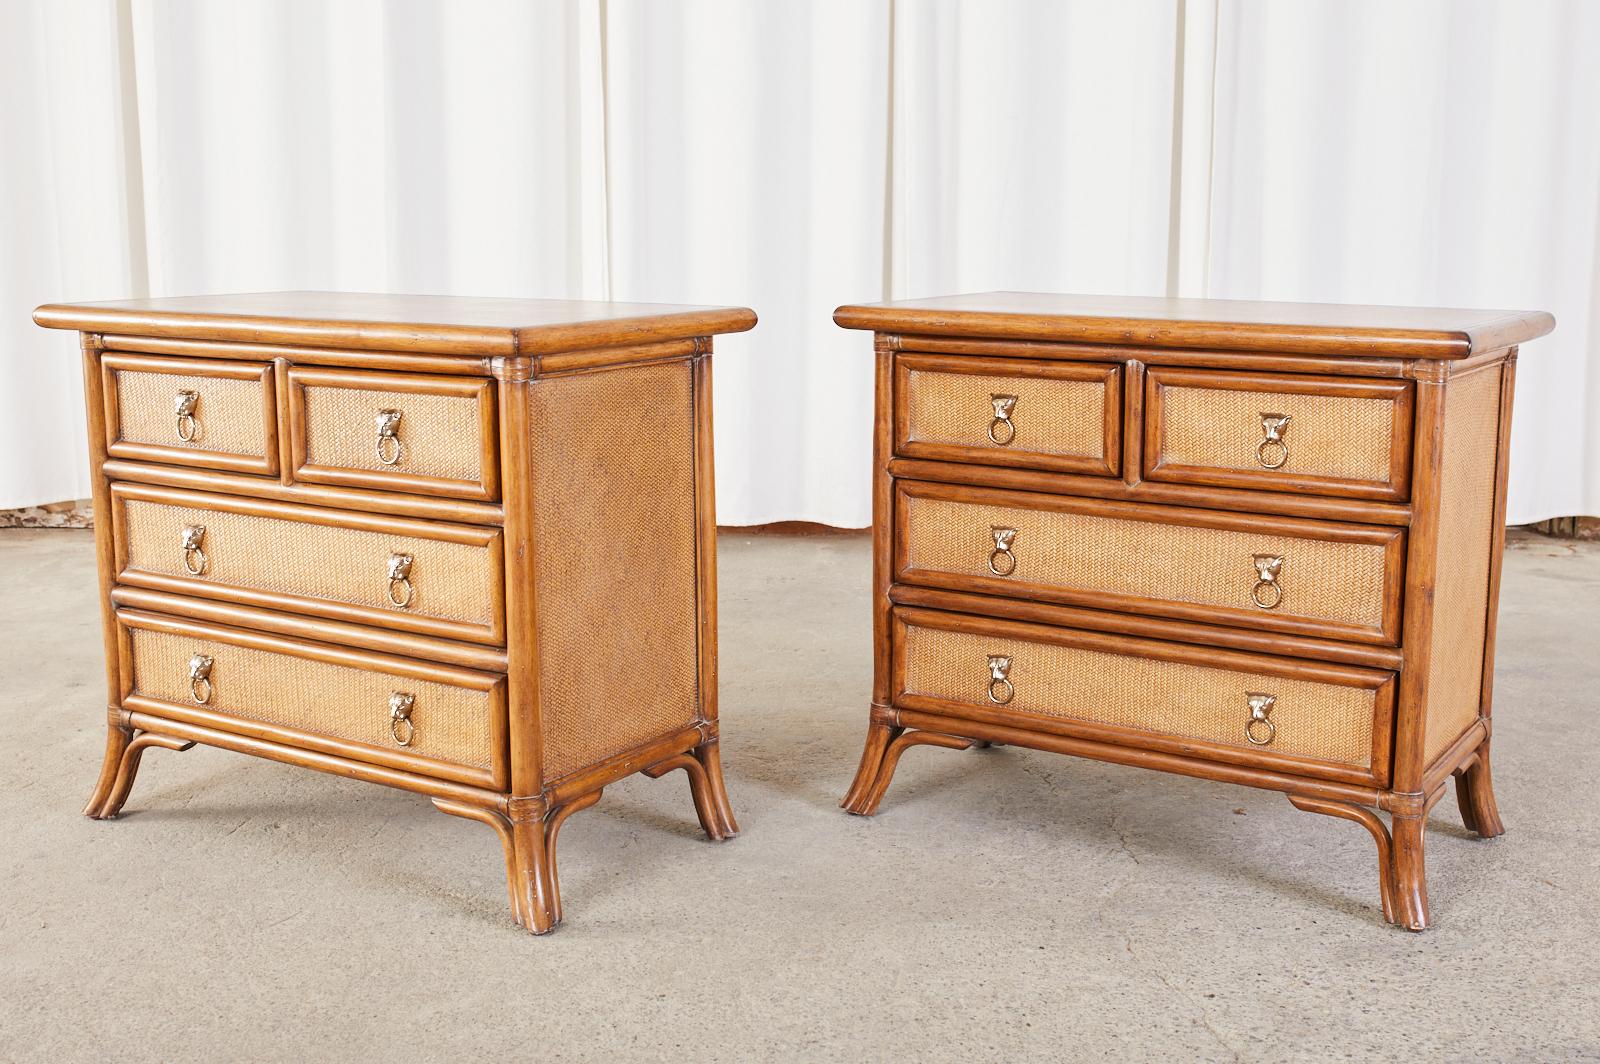 Fabulous pair of rattan nightstands made in the organic modern style by Kreiss. The chests feature a rattan frame with a leather top and raffia grasscloth inset. Fronted by five large storage drawers with silvered lions head ring pulls. Each drawer